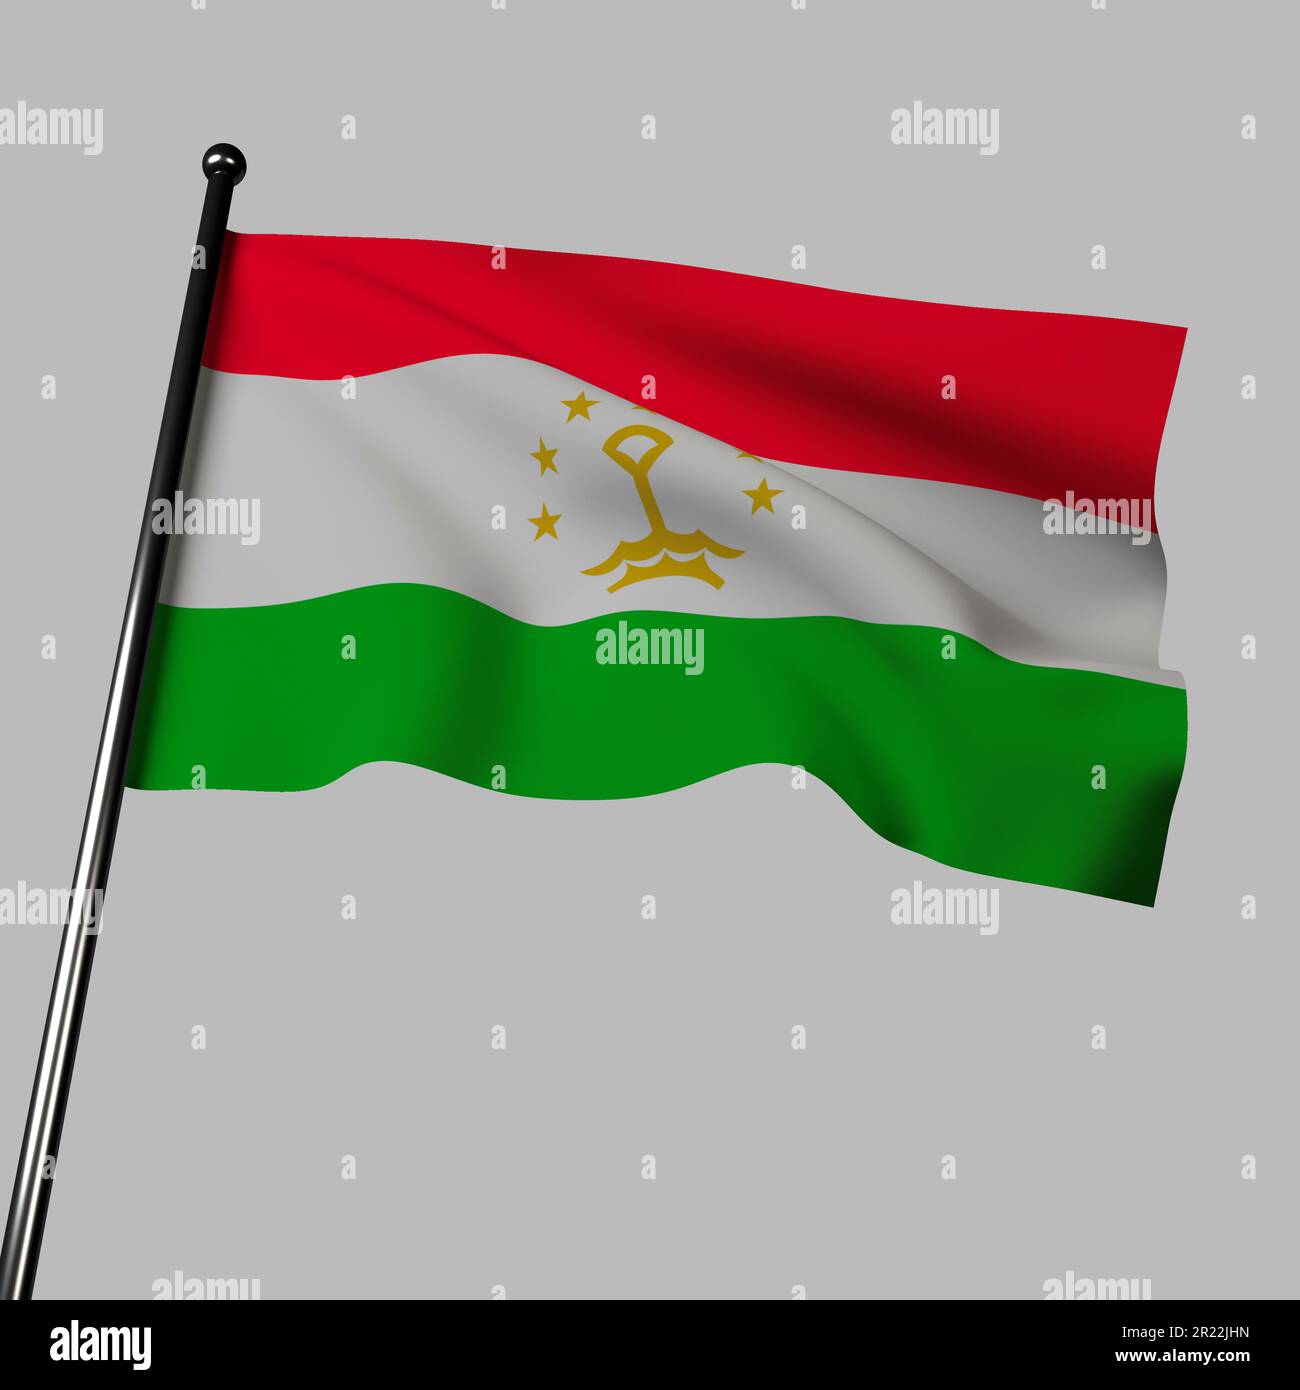 Illustration of Tajikistan's flag waving in the wind, isolated on a gray background. The flag has three horizontal stripes of red, white, and green Stock Photo